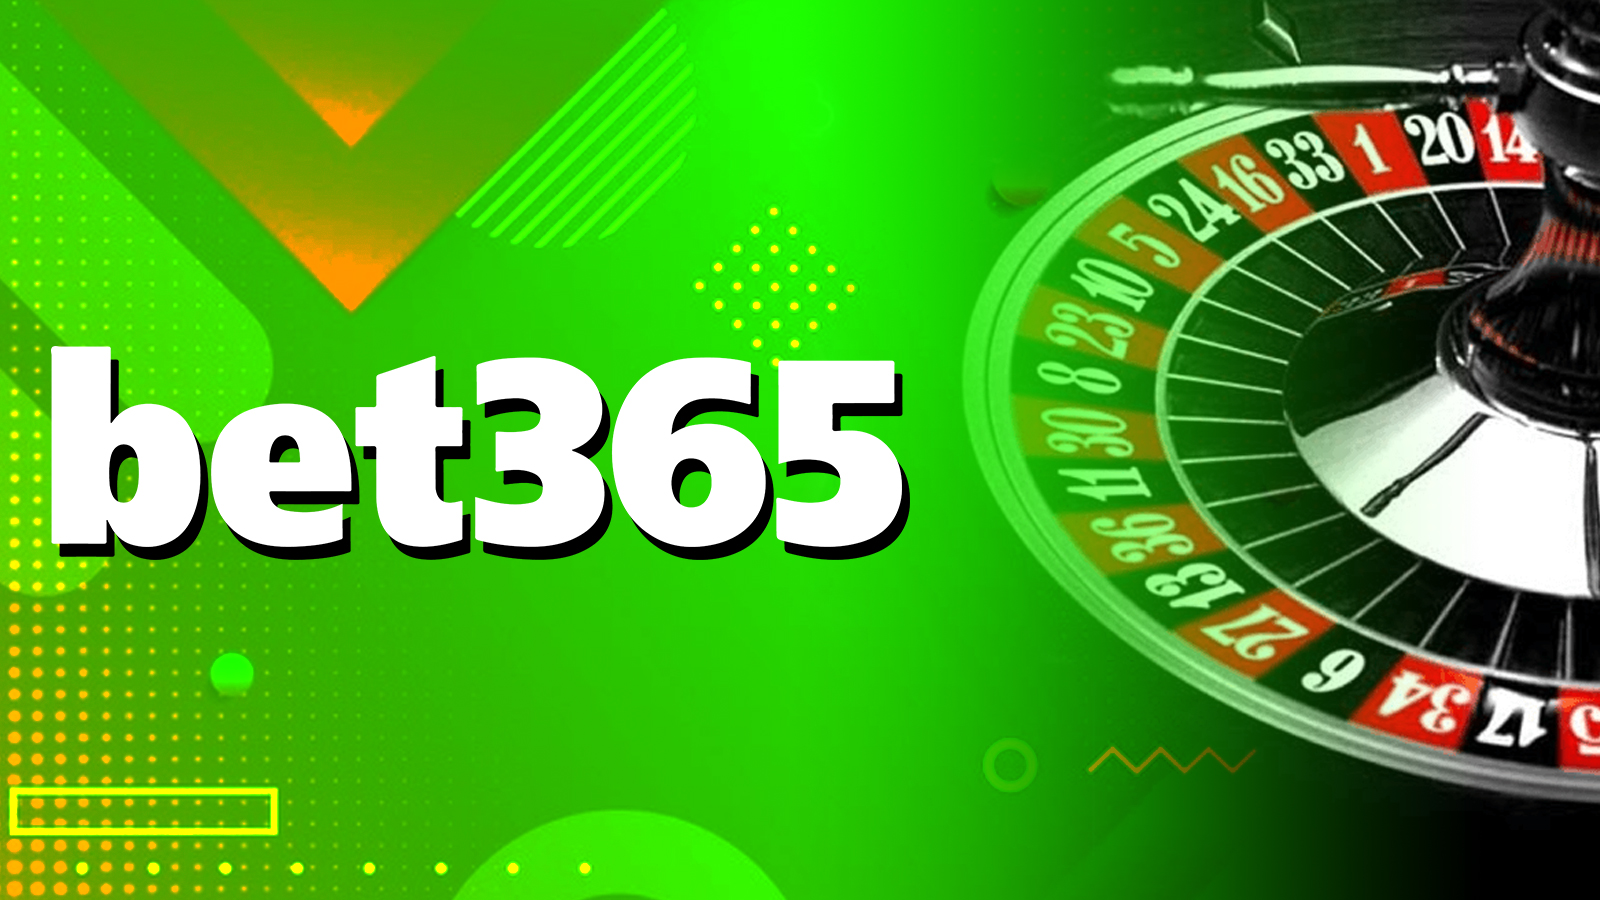 Play online roulette in bet365 casino